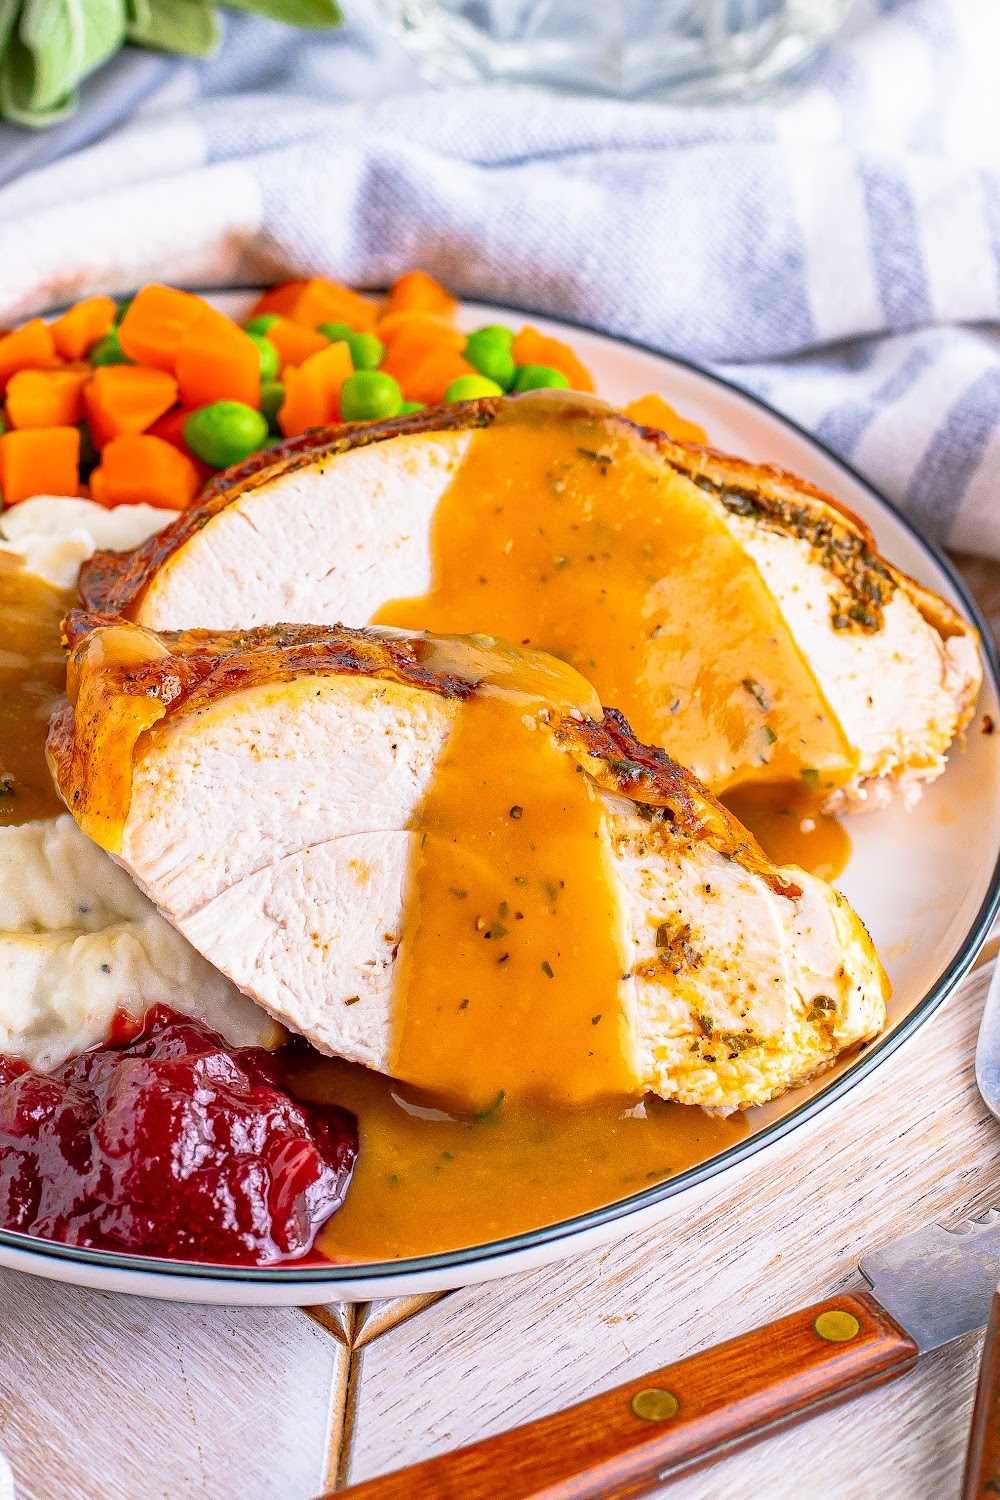 Gravy drizzled over slices of roasted turkey.